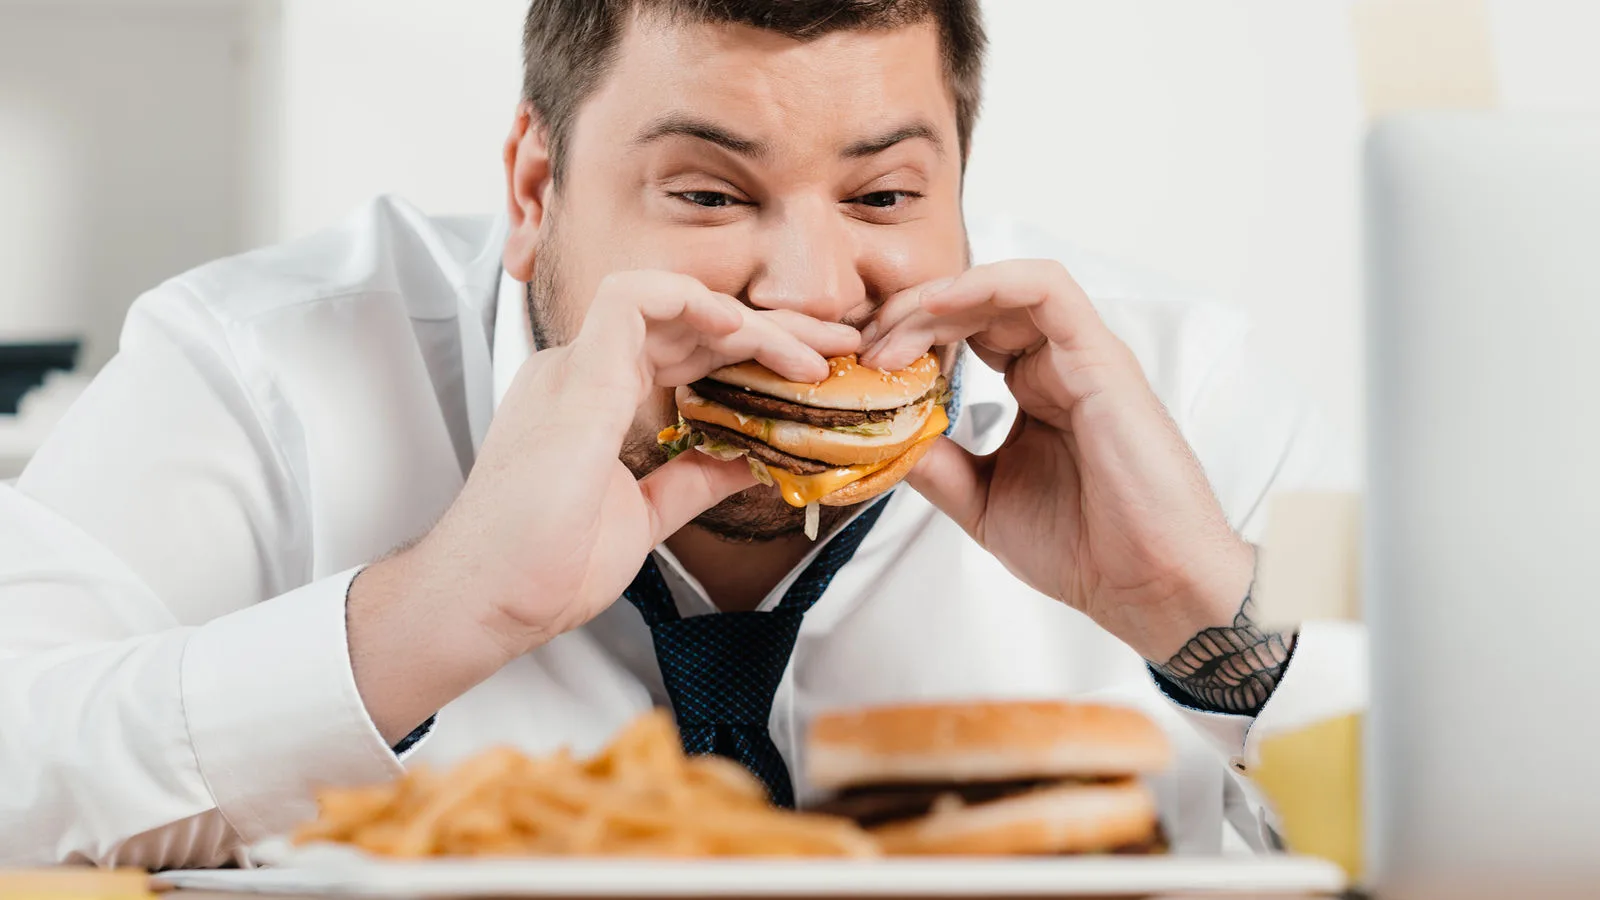 person eating burger, fast food